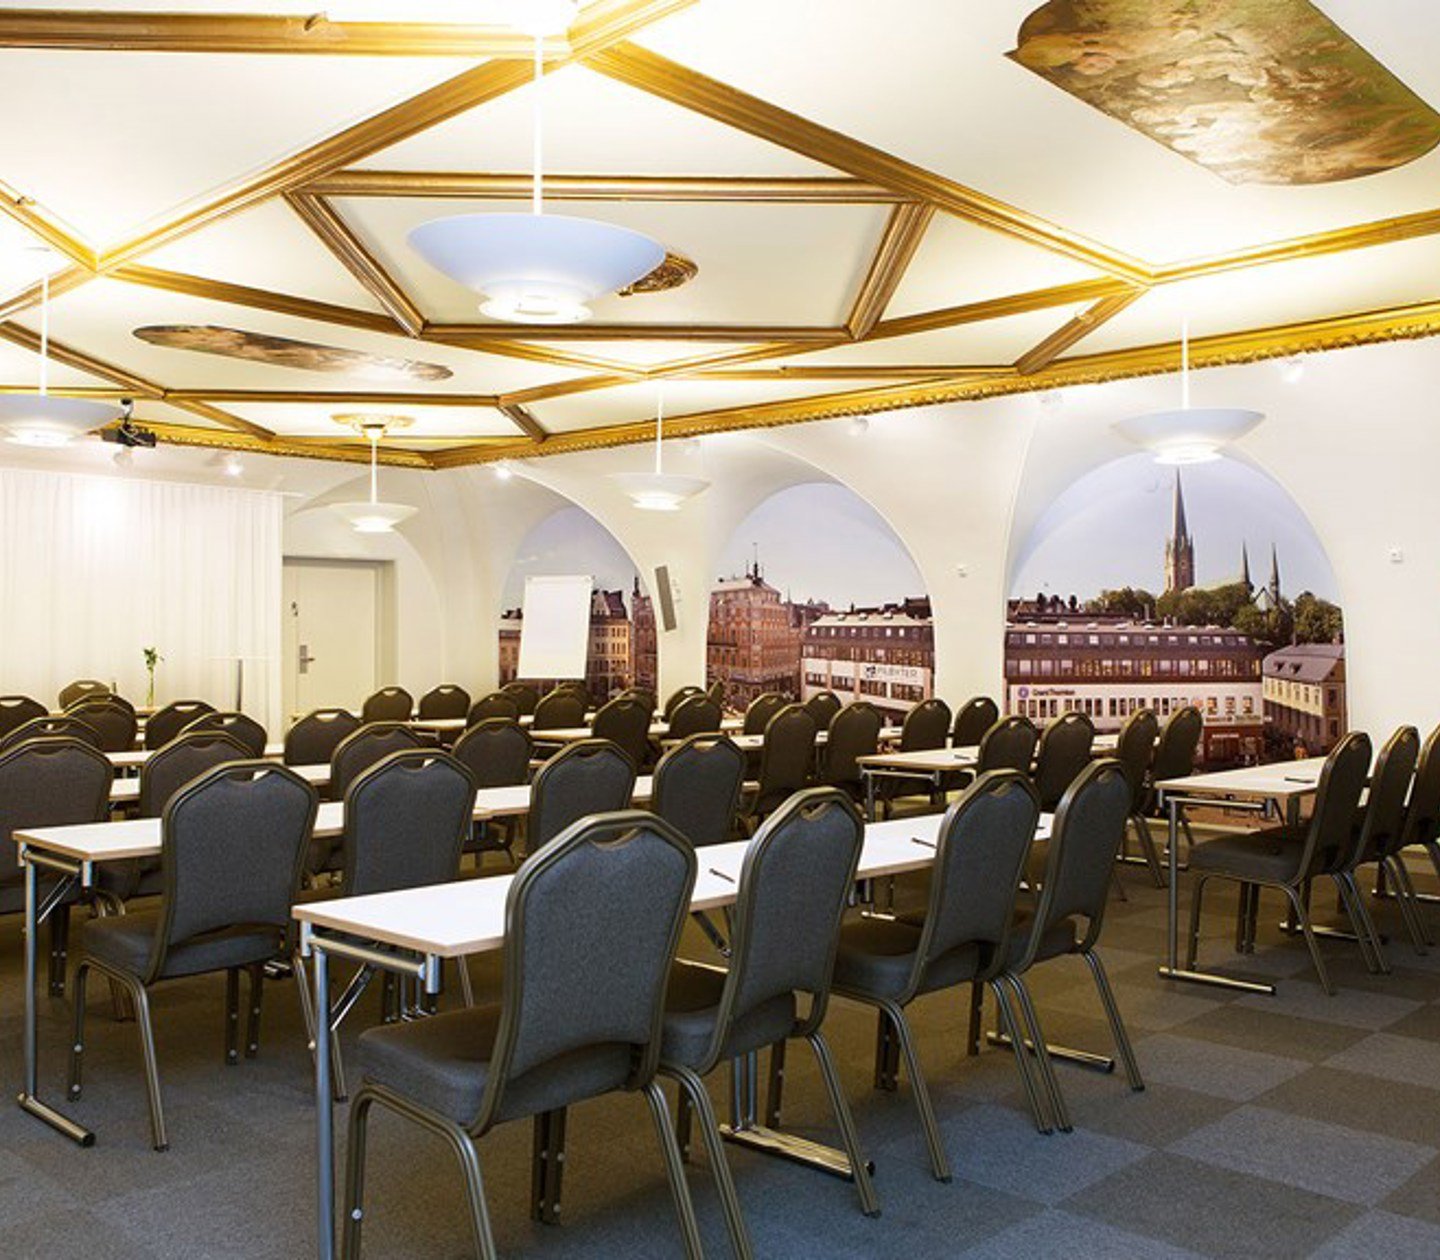 Large conference room with lined up chairs, illuminated ceiling with gold details and dark floor